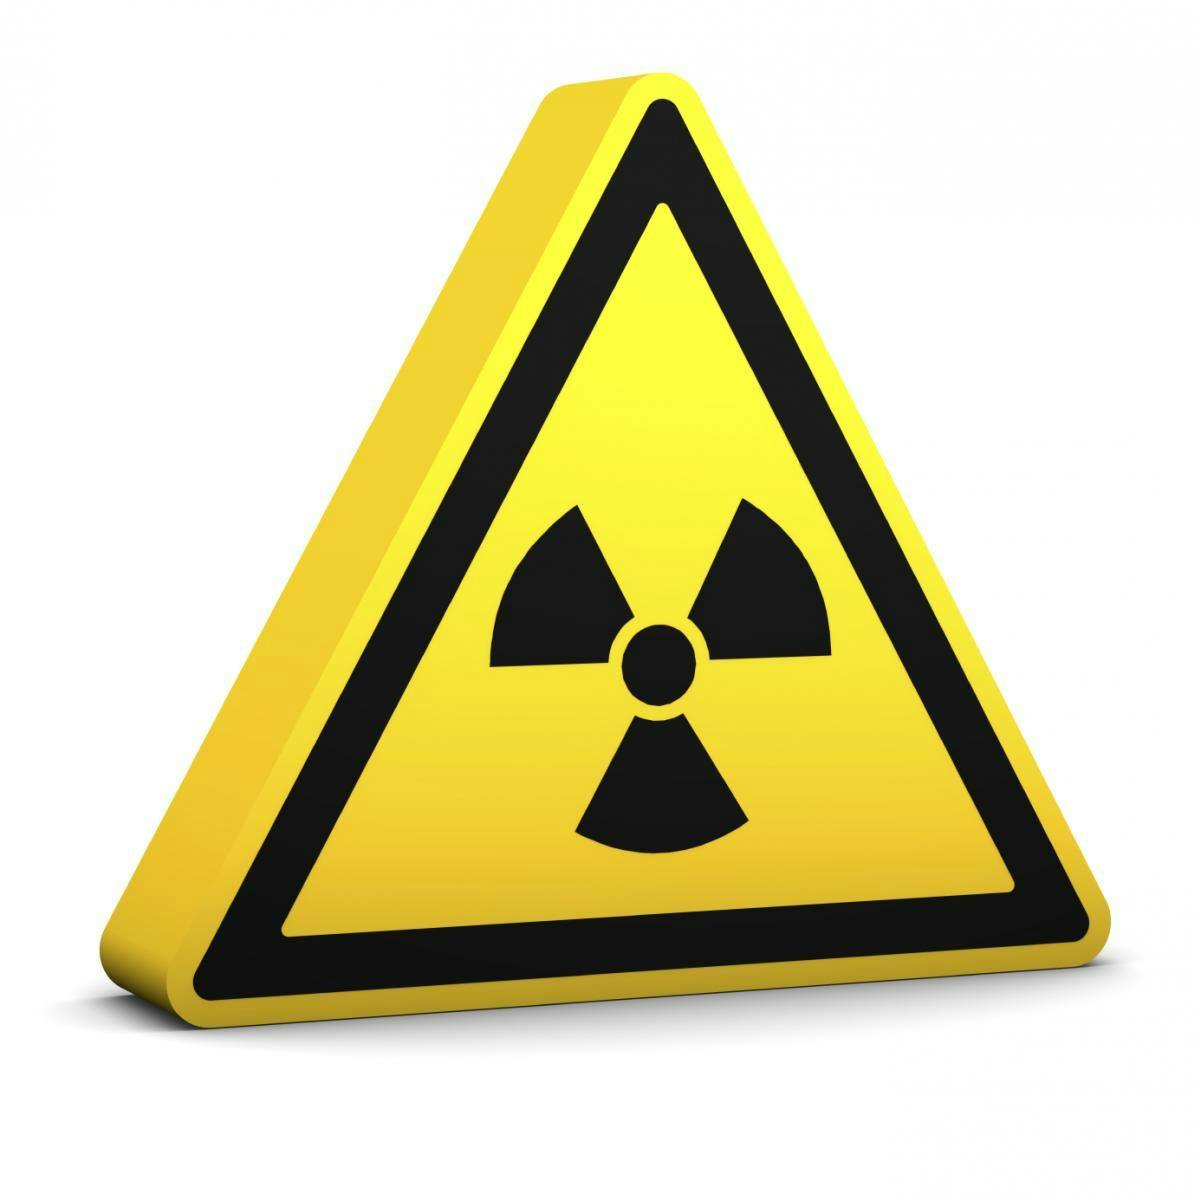 Orphan Drug Designation Granted to Potential Acute Radiation Syndrome Treatment